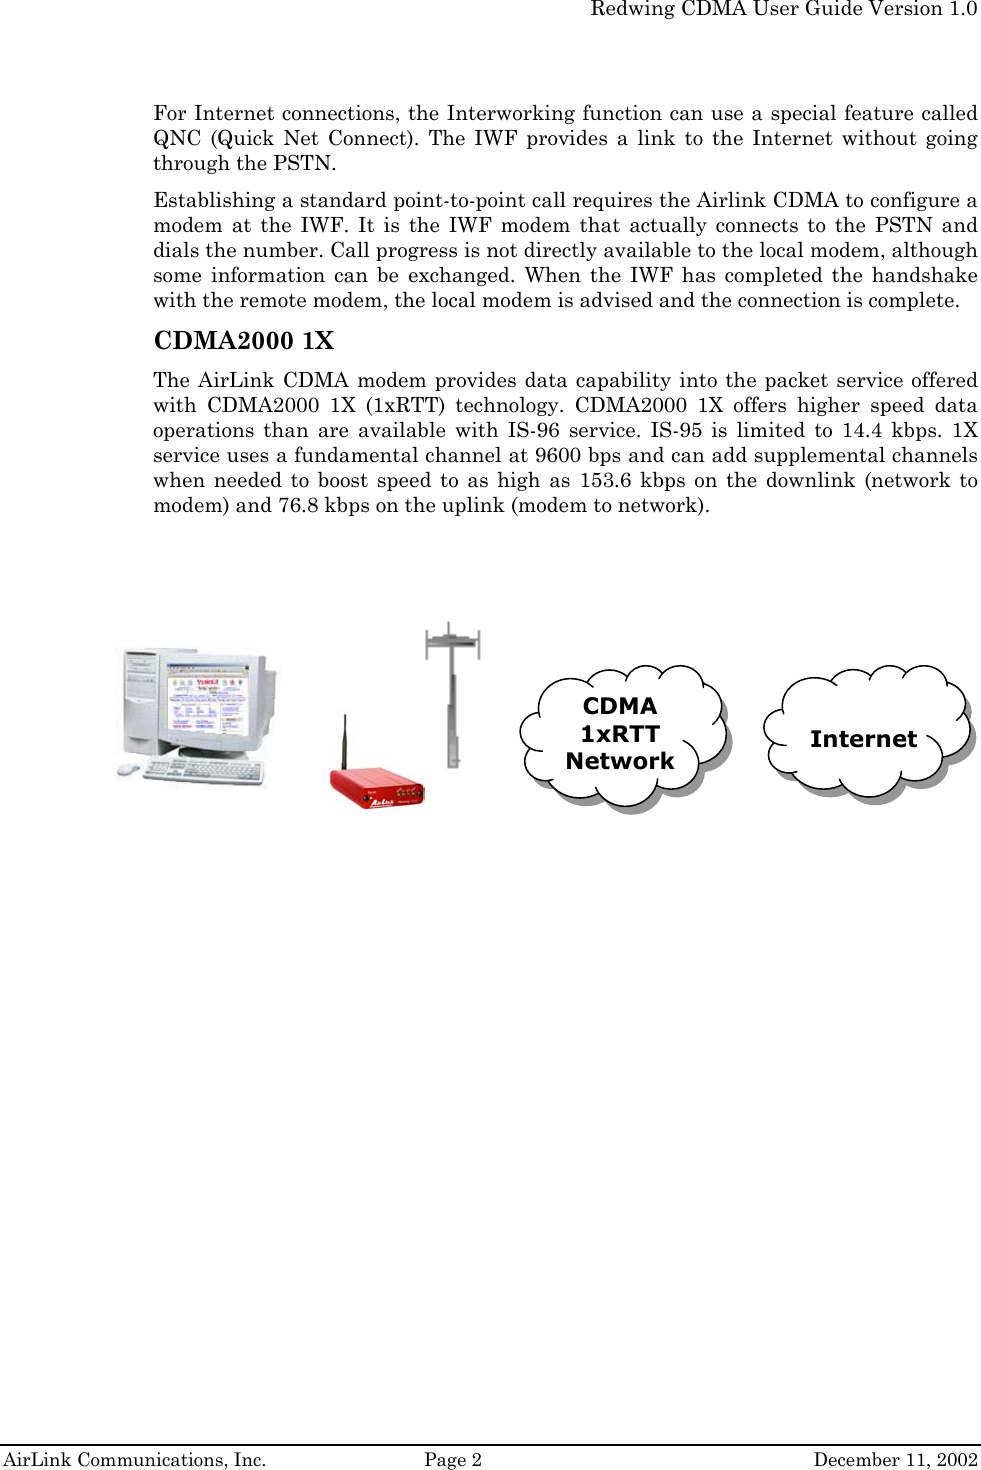   Redwing CDMA User Guide Version 1.0   AirLink Communications, Inc.  Page 2  December 11, 2002  For Internet connections, the Interworking function can use a special feature called QNC (Quick Net Connect). The IWF provides a link to the Internet without going through the PSTN.  Establishing a standard point-to-point call requires the Airlink CDMA to configure a modem at the IWF. It is the IWF modem that actually connects to the PSTN and dials the number. Call progress is not directly available to the local modem, although some information can be exchanged. When the IWF has completed the handshake with the remote modem, the local modem is advised and the connection is complete. CDMA2000 1X The AirLink CDMA modem provides data capability into the packet service offered with CDMA2000 1X (1xRTT) technology. CDMA2000 1X offers higher speed data operations than are available with IS-96 service. IS-95 is limited to 14.4 kbps. 1X service uses a fundamental channel at 9600 bps and can add supplemental channels when needed to boost speed to as high as 153.6 kbps on the downlink (network to modem) and 76.8 kbps on the uplink (modem to network).        CDMA 1xRTT Network  Internet 